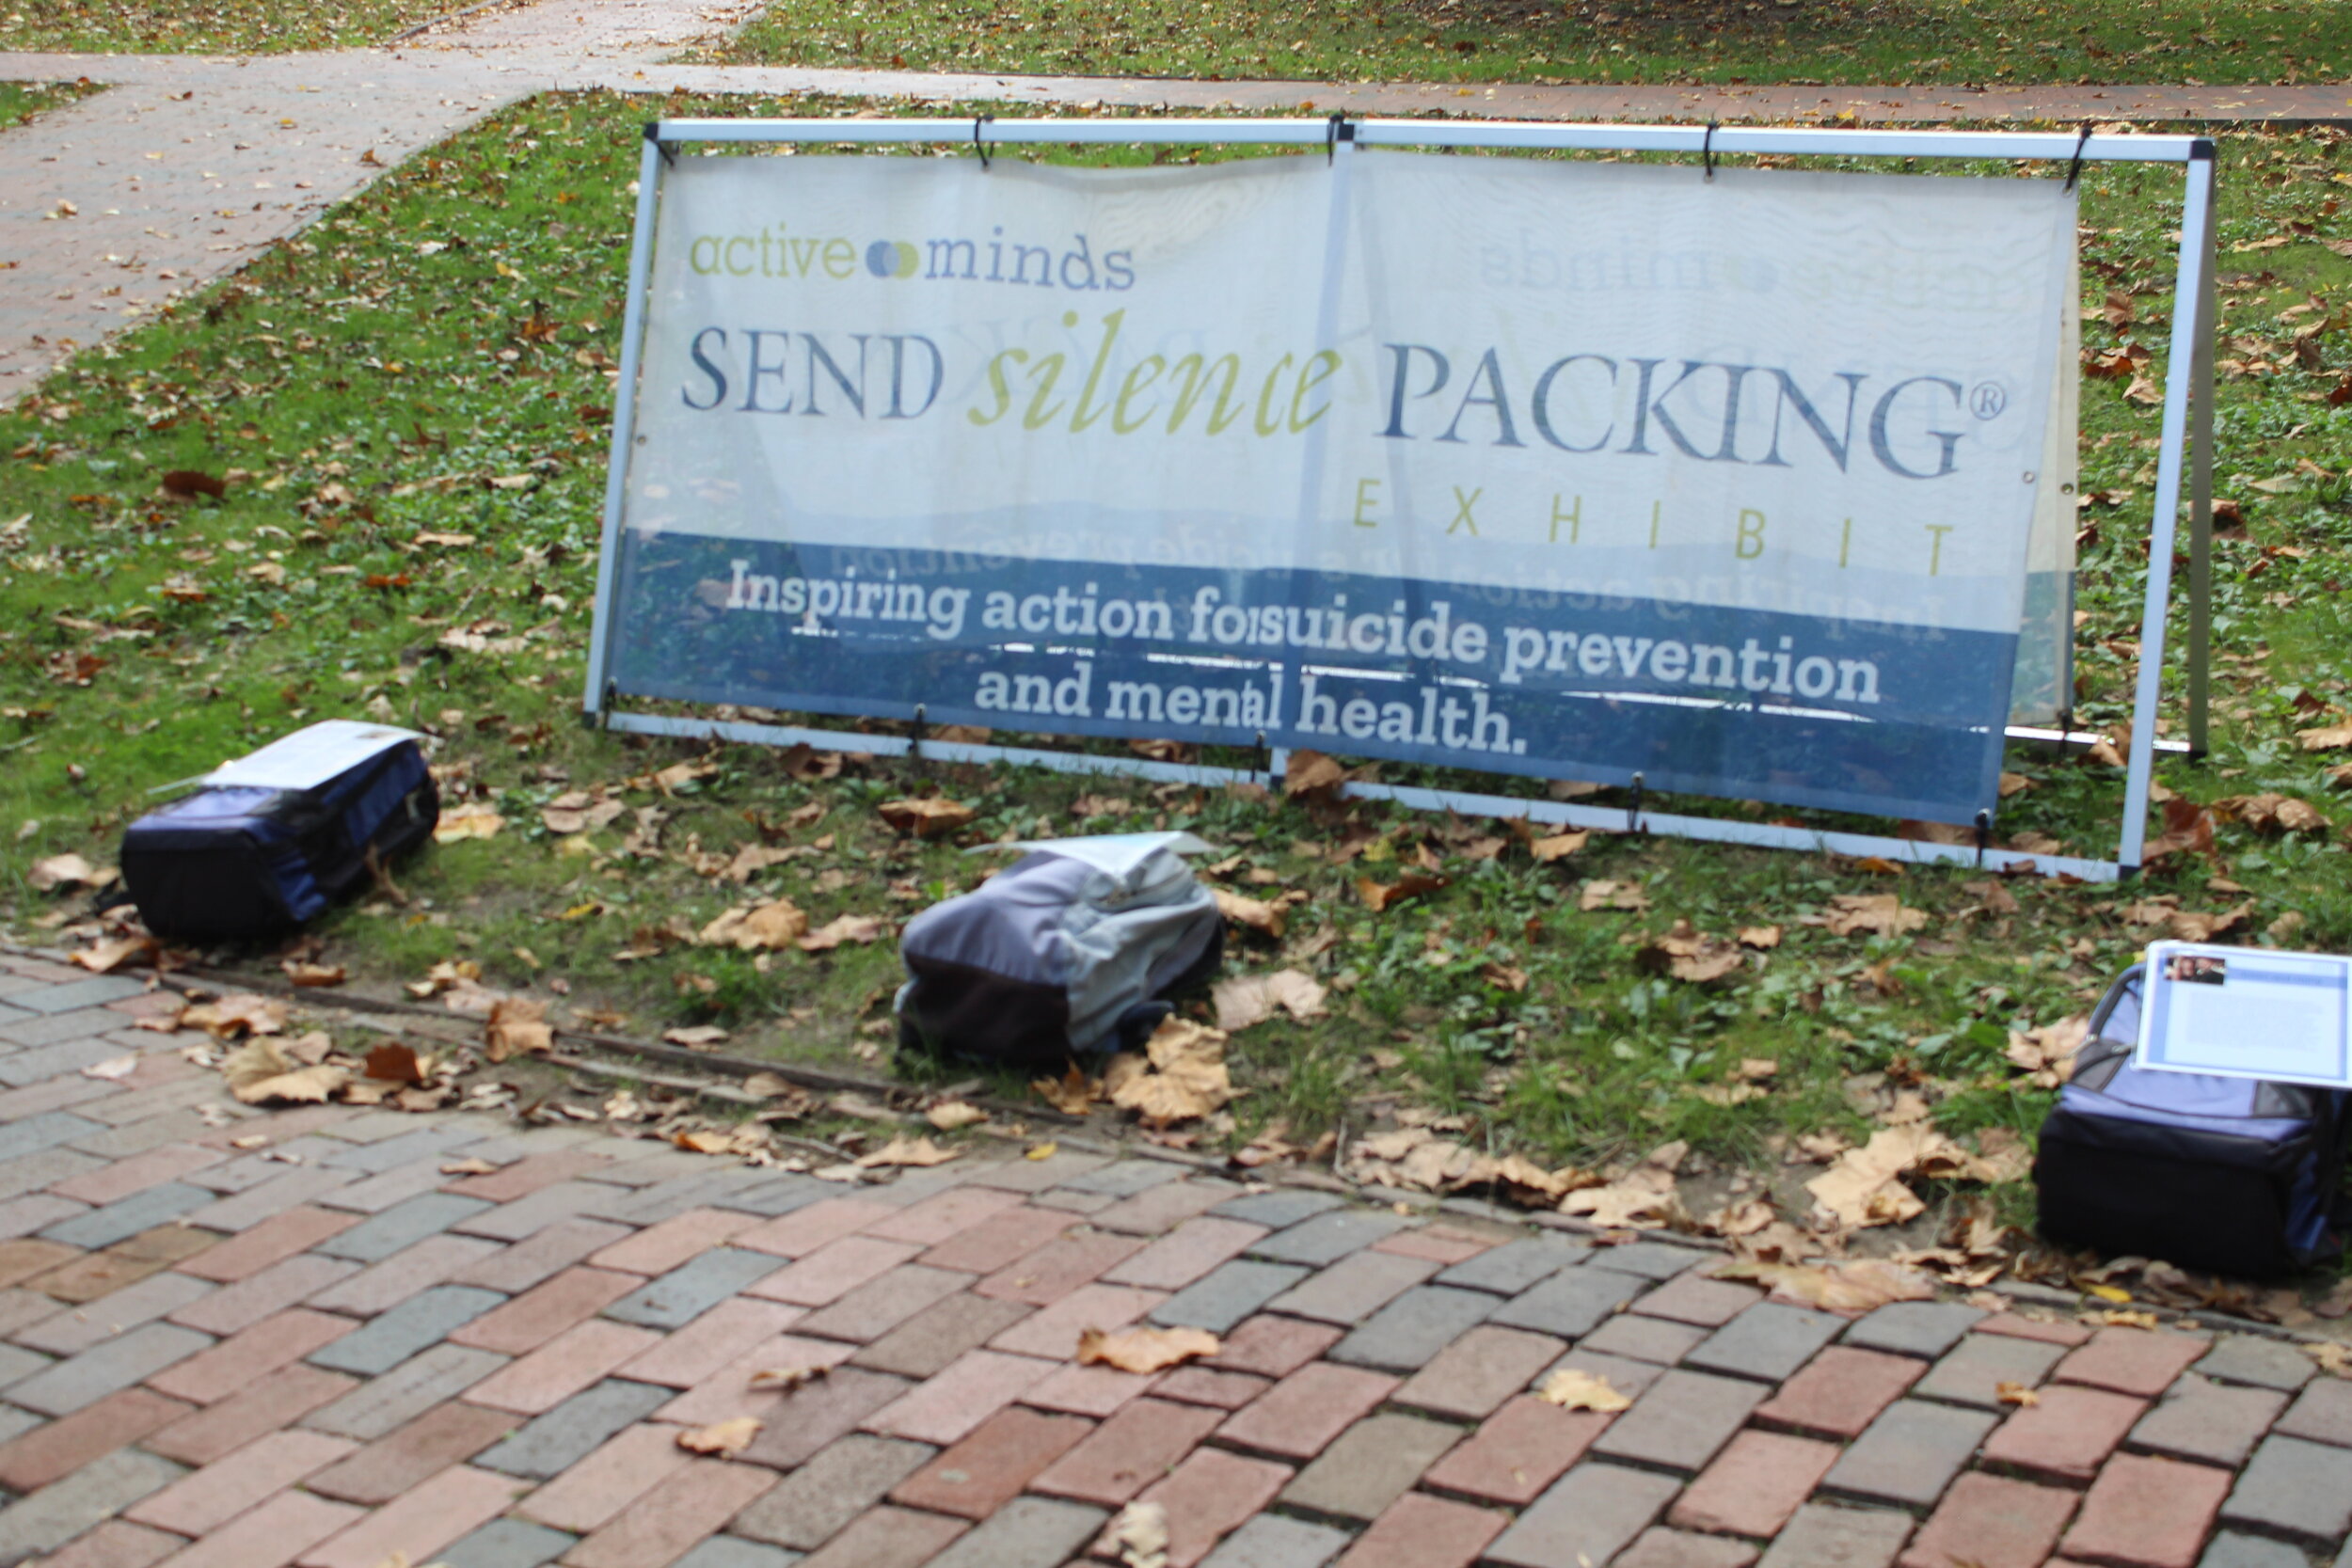  “Send Silence Packing” banner lays behind some of the bookbags for the exhibit. Photo by Emily Zeiler. 